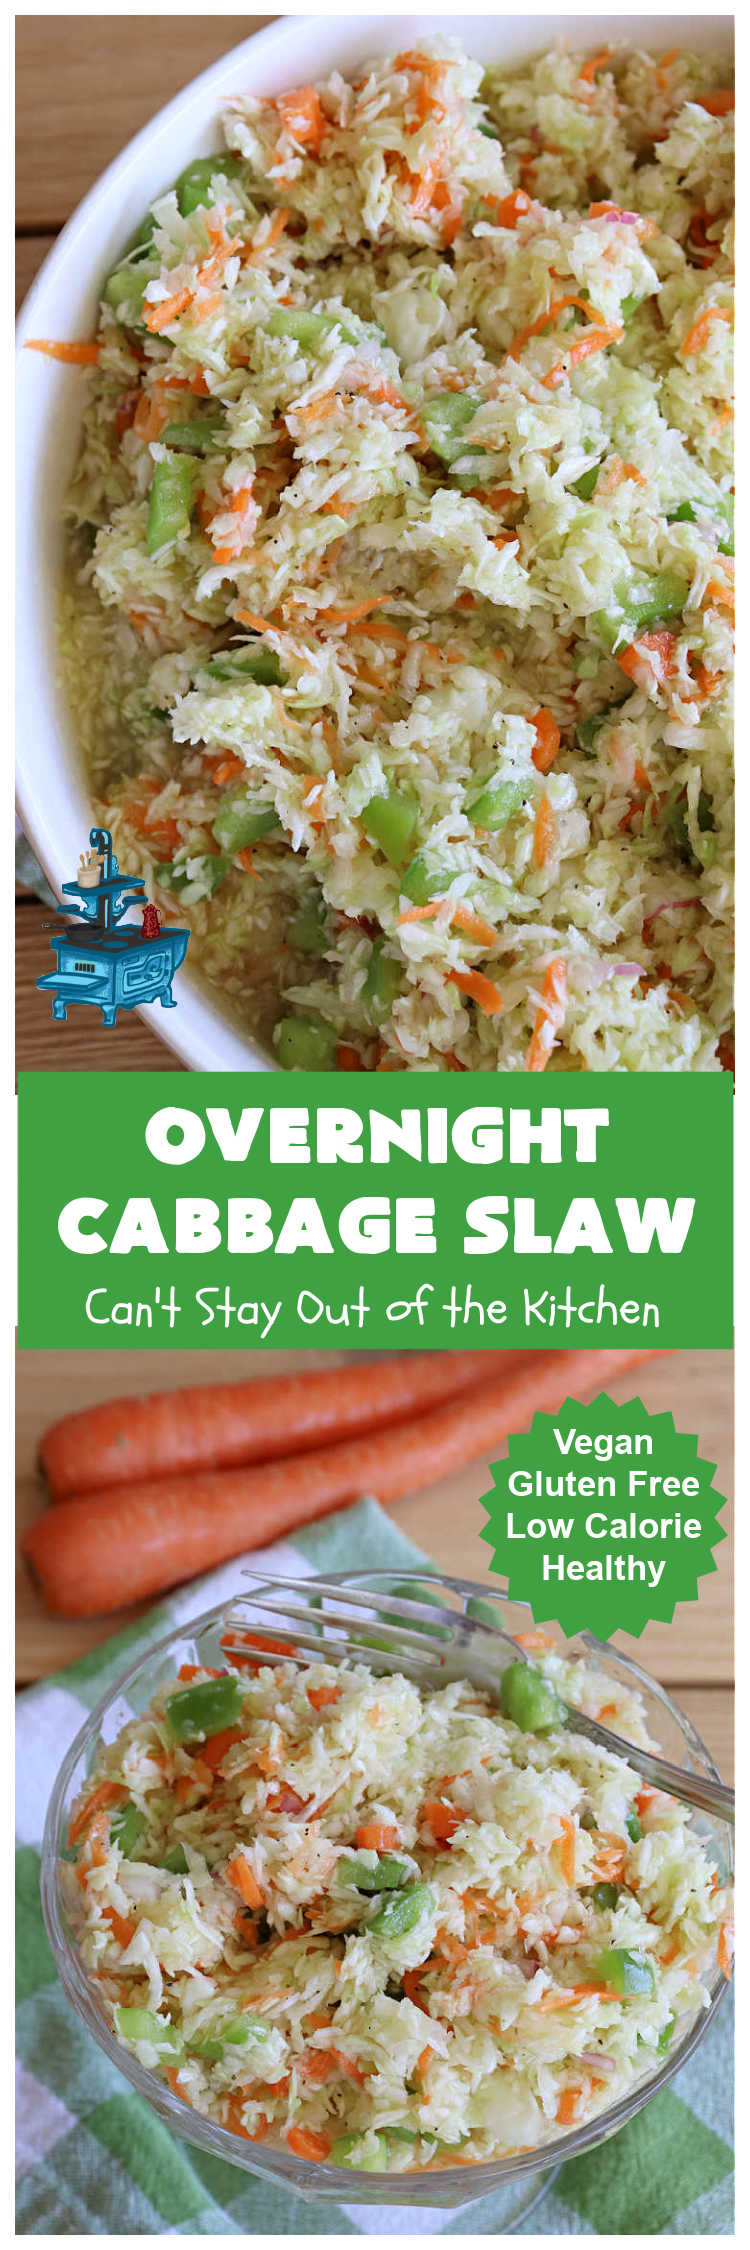 Overnight Cabbage Slaw | Can't Stay Out of the Kitchen | this delicious #ColeSlaw #recipe includes shredded #cabbage, #carrots, green bell pepper and red onion. It has an oil & vinegar dressing that's #healthy #LowCalorie, #vegan & #GlutenFree. Since it's made in advance, it's perfect for summer #holidays, potlucks, #tailgating parties, backyard BBQs or grilling out with friends. #OvernightCabbageSlaw